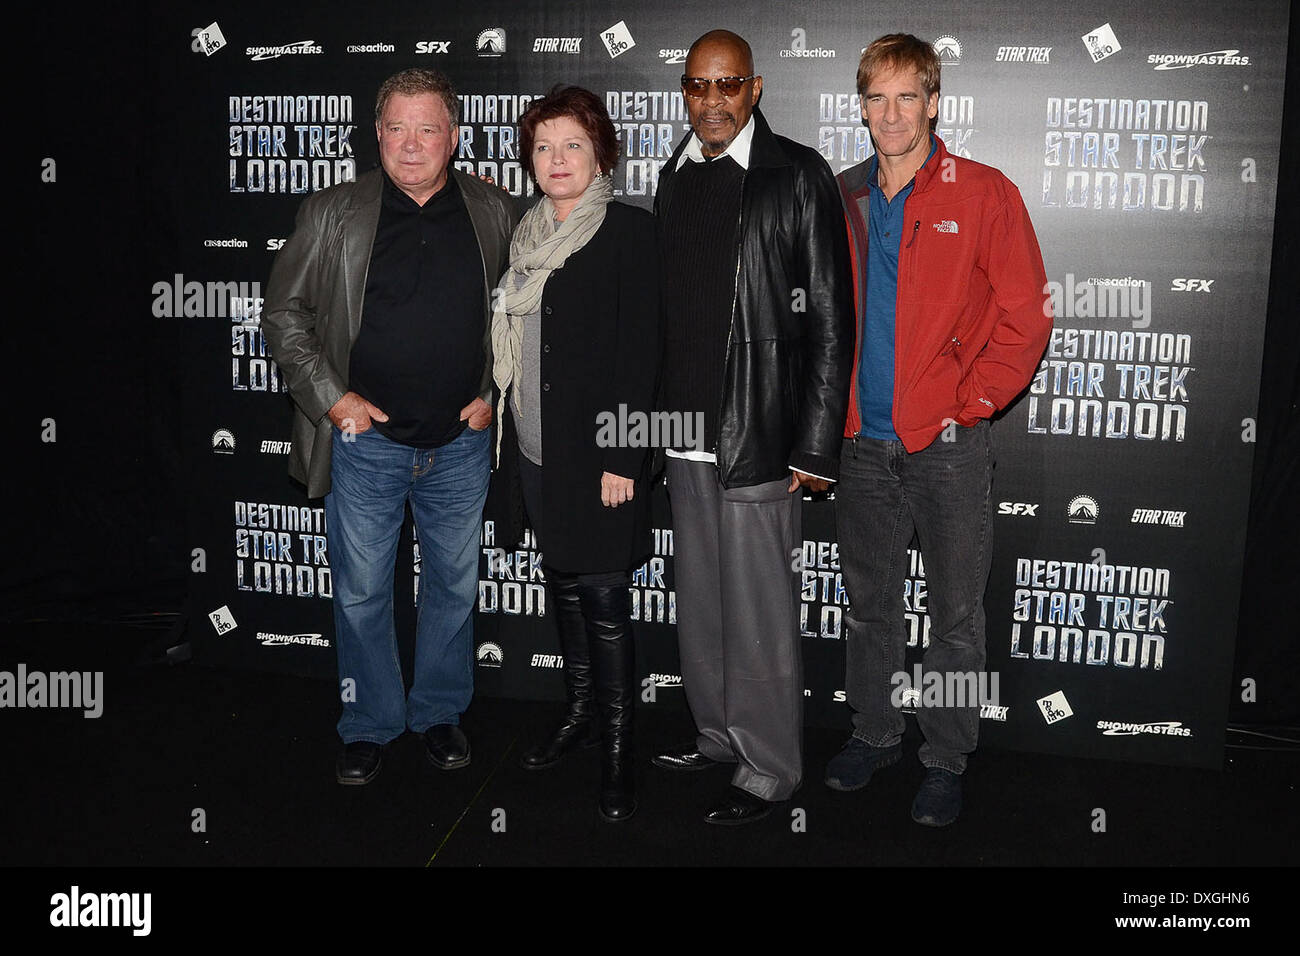 William Shatner, Kate Mulgrew, Avery Brooks and Scott Bakula pose for  photographers, without British actor Patrick Stewart after he refused to  take part in a photocall for 'Destination Star Trek London' at